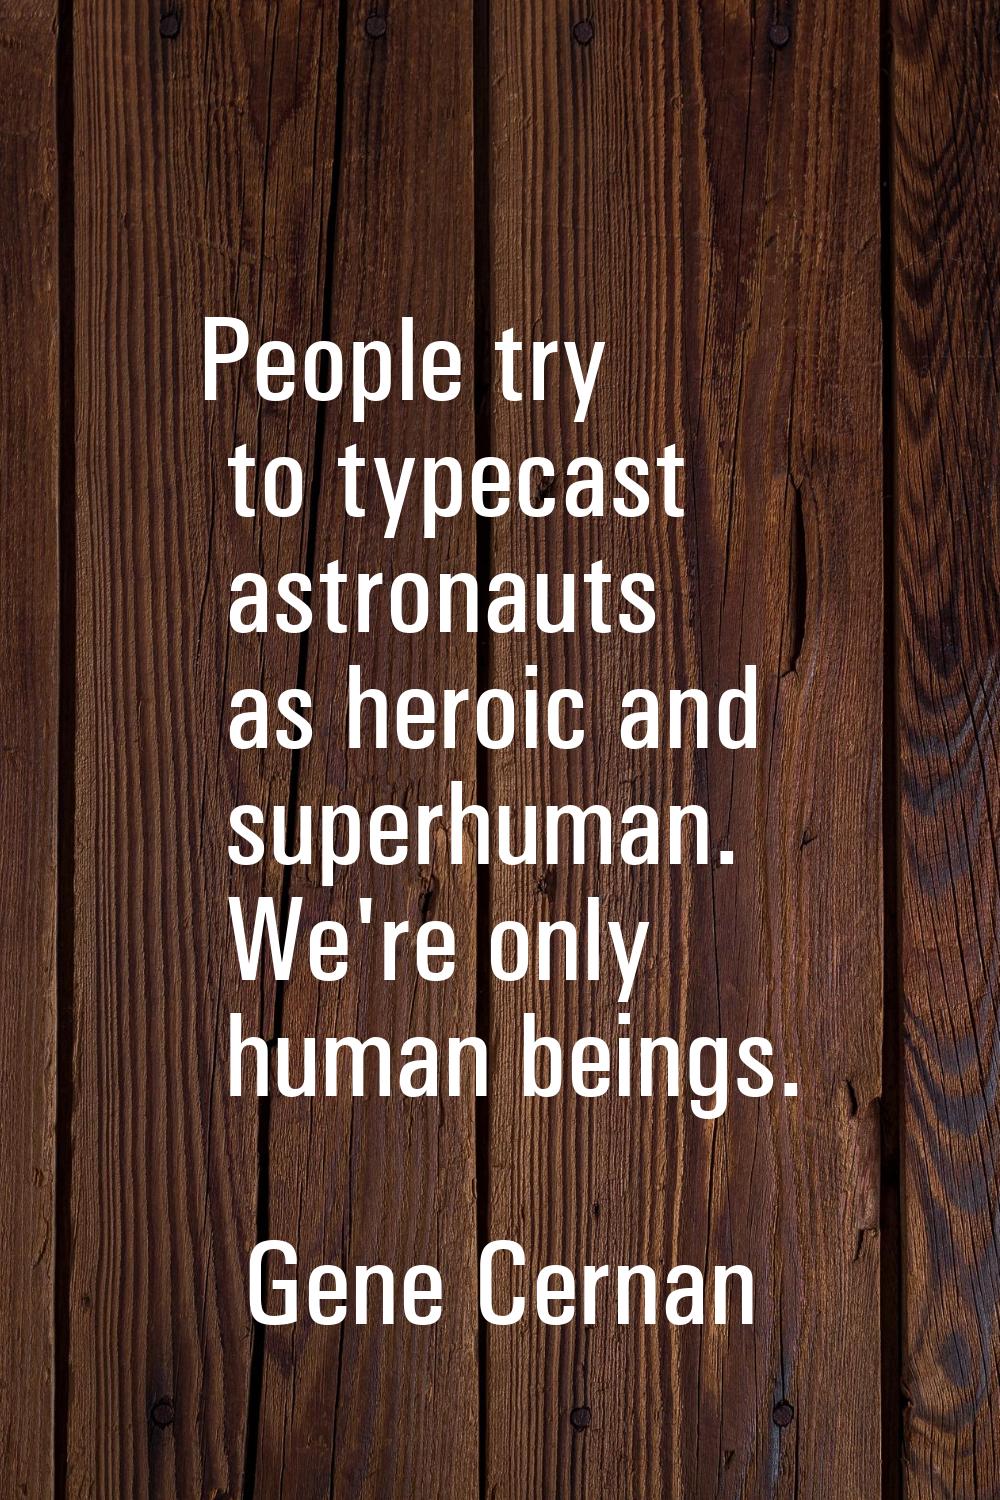 People try to typecast astronauts as heroic and superhuman. We're only human beings.